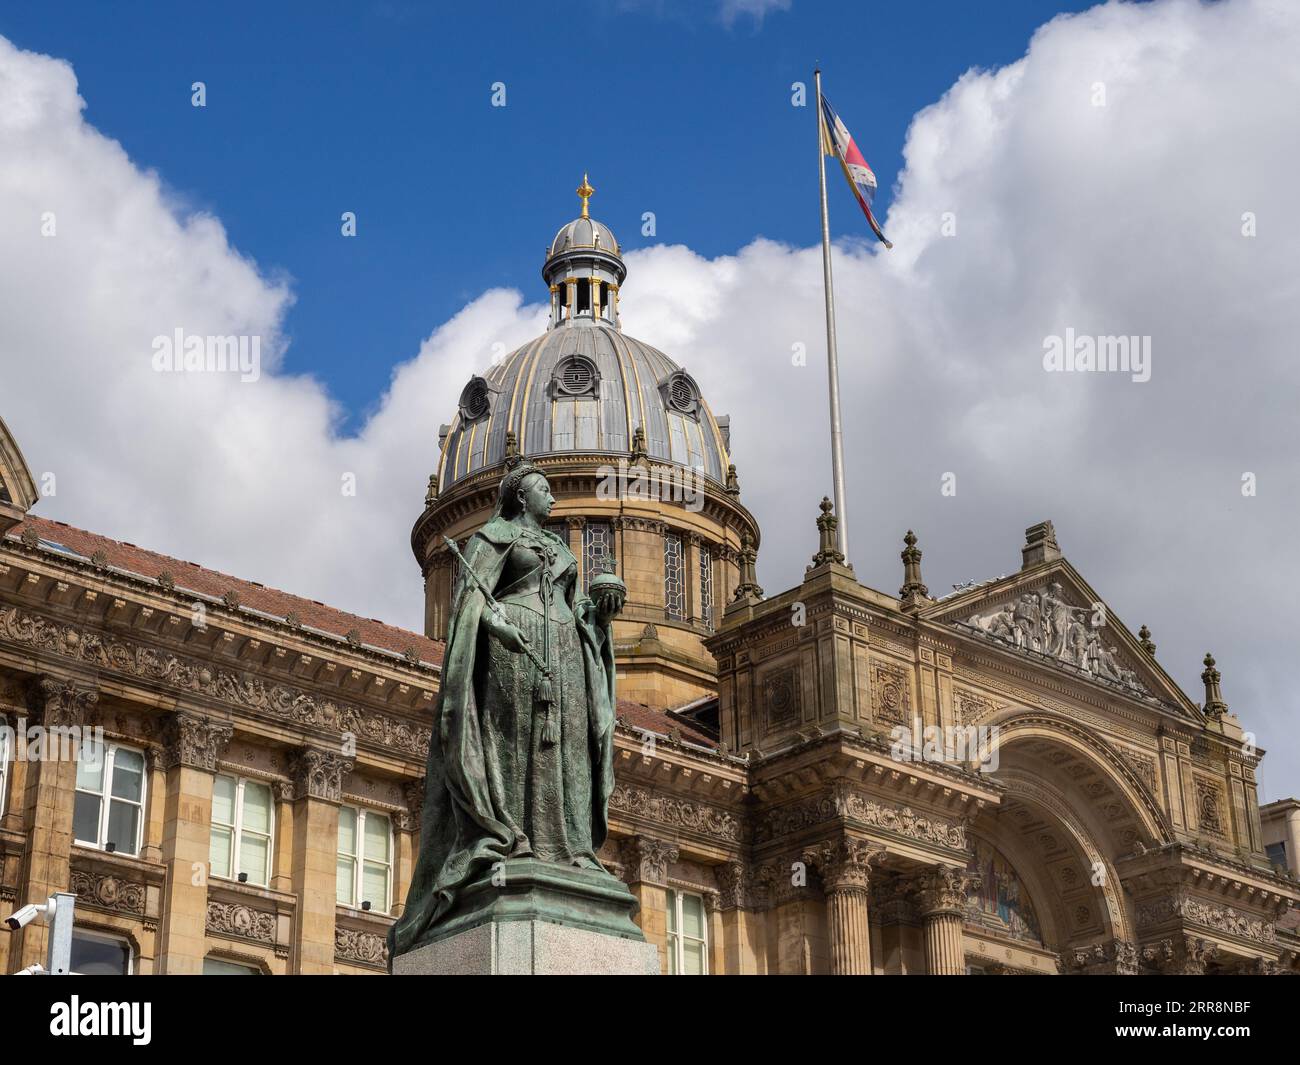 Victoria Square, Birmingham, UK; statue of Queen Victoria in the foreground, The Council House to the rear. Stock Photo